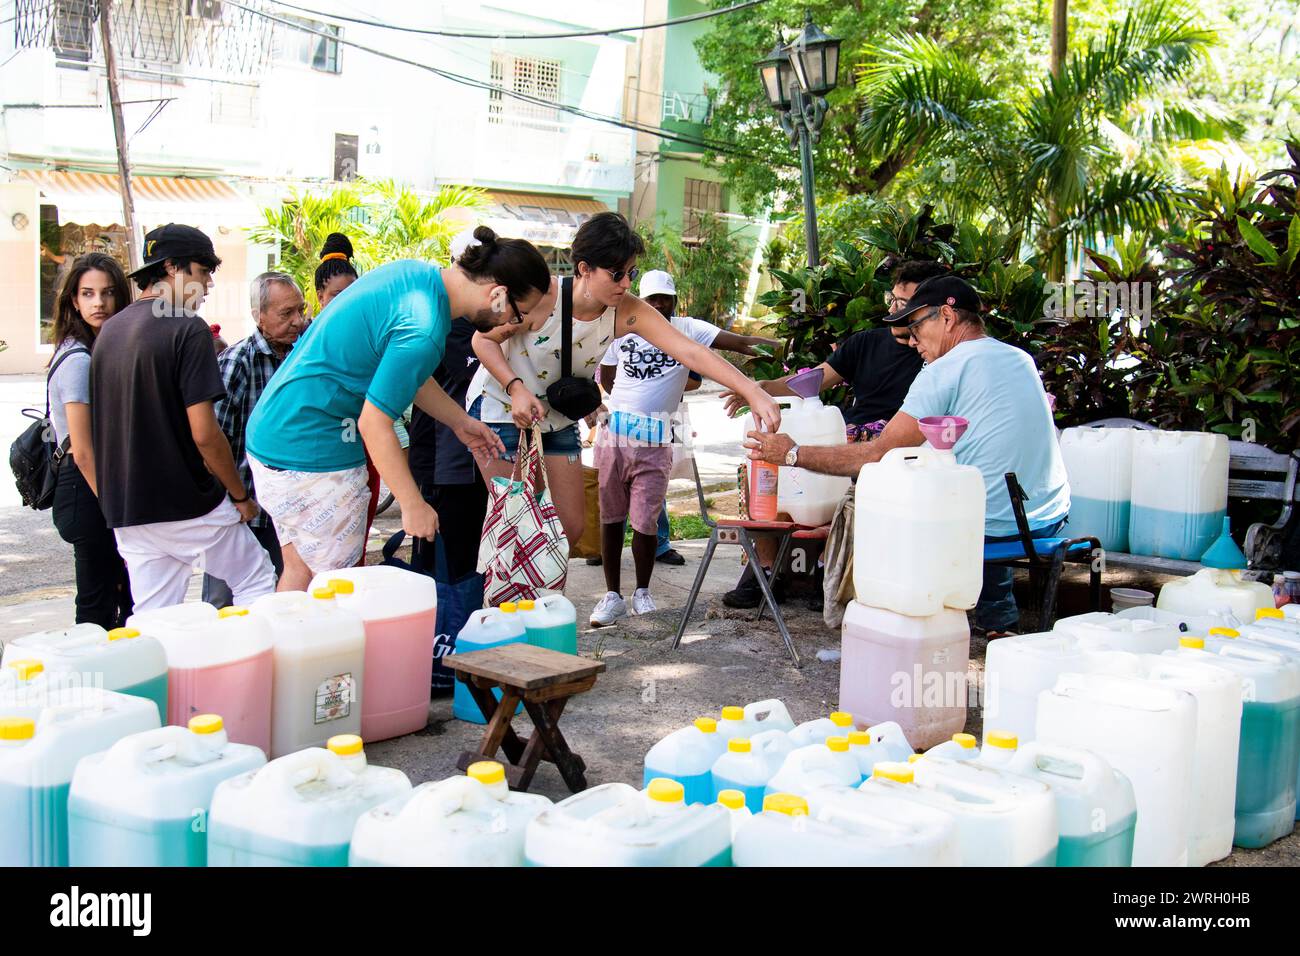 People getting government sponsored free laundry detergent at a park in Havana, Cuba. Stock Photo